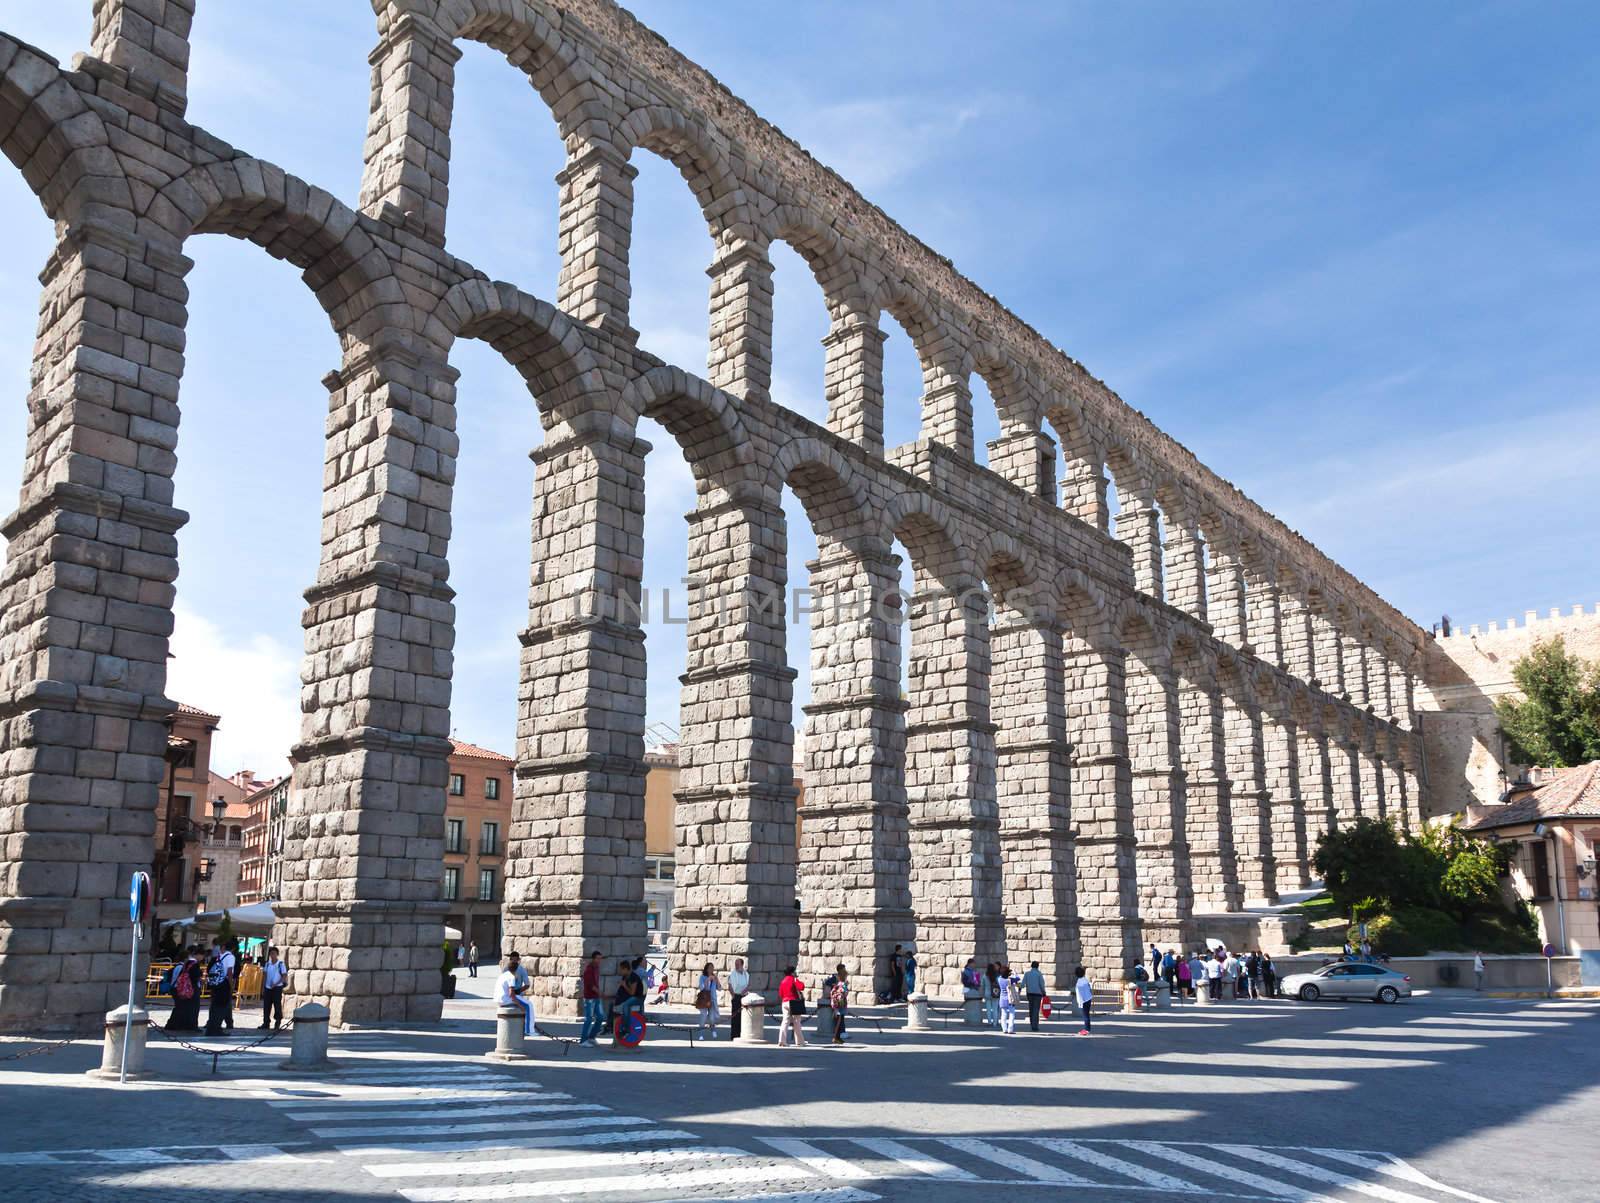 The famous ancient aqueduct in Segovia Spain